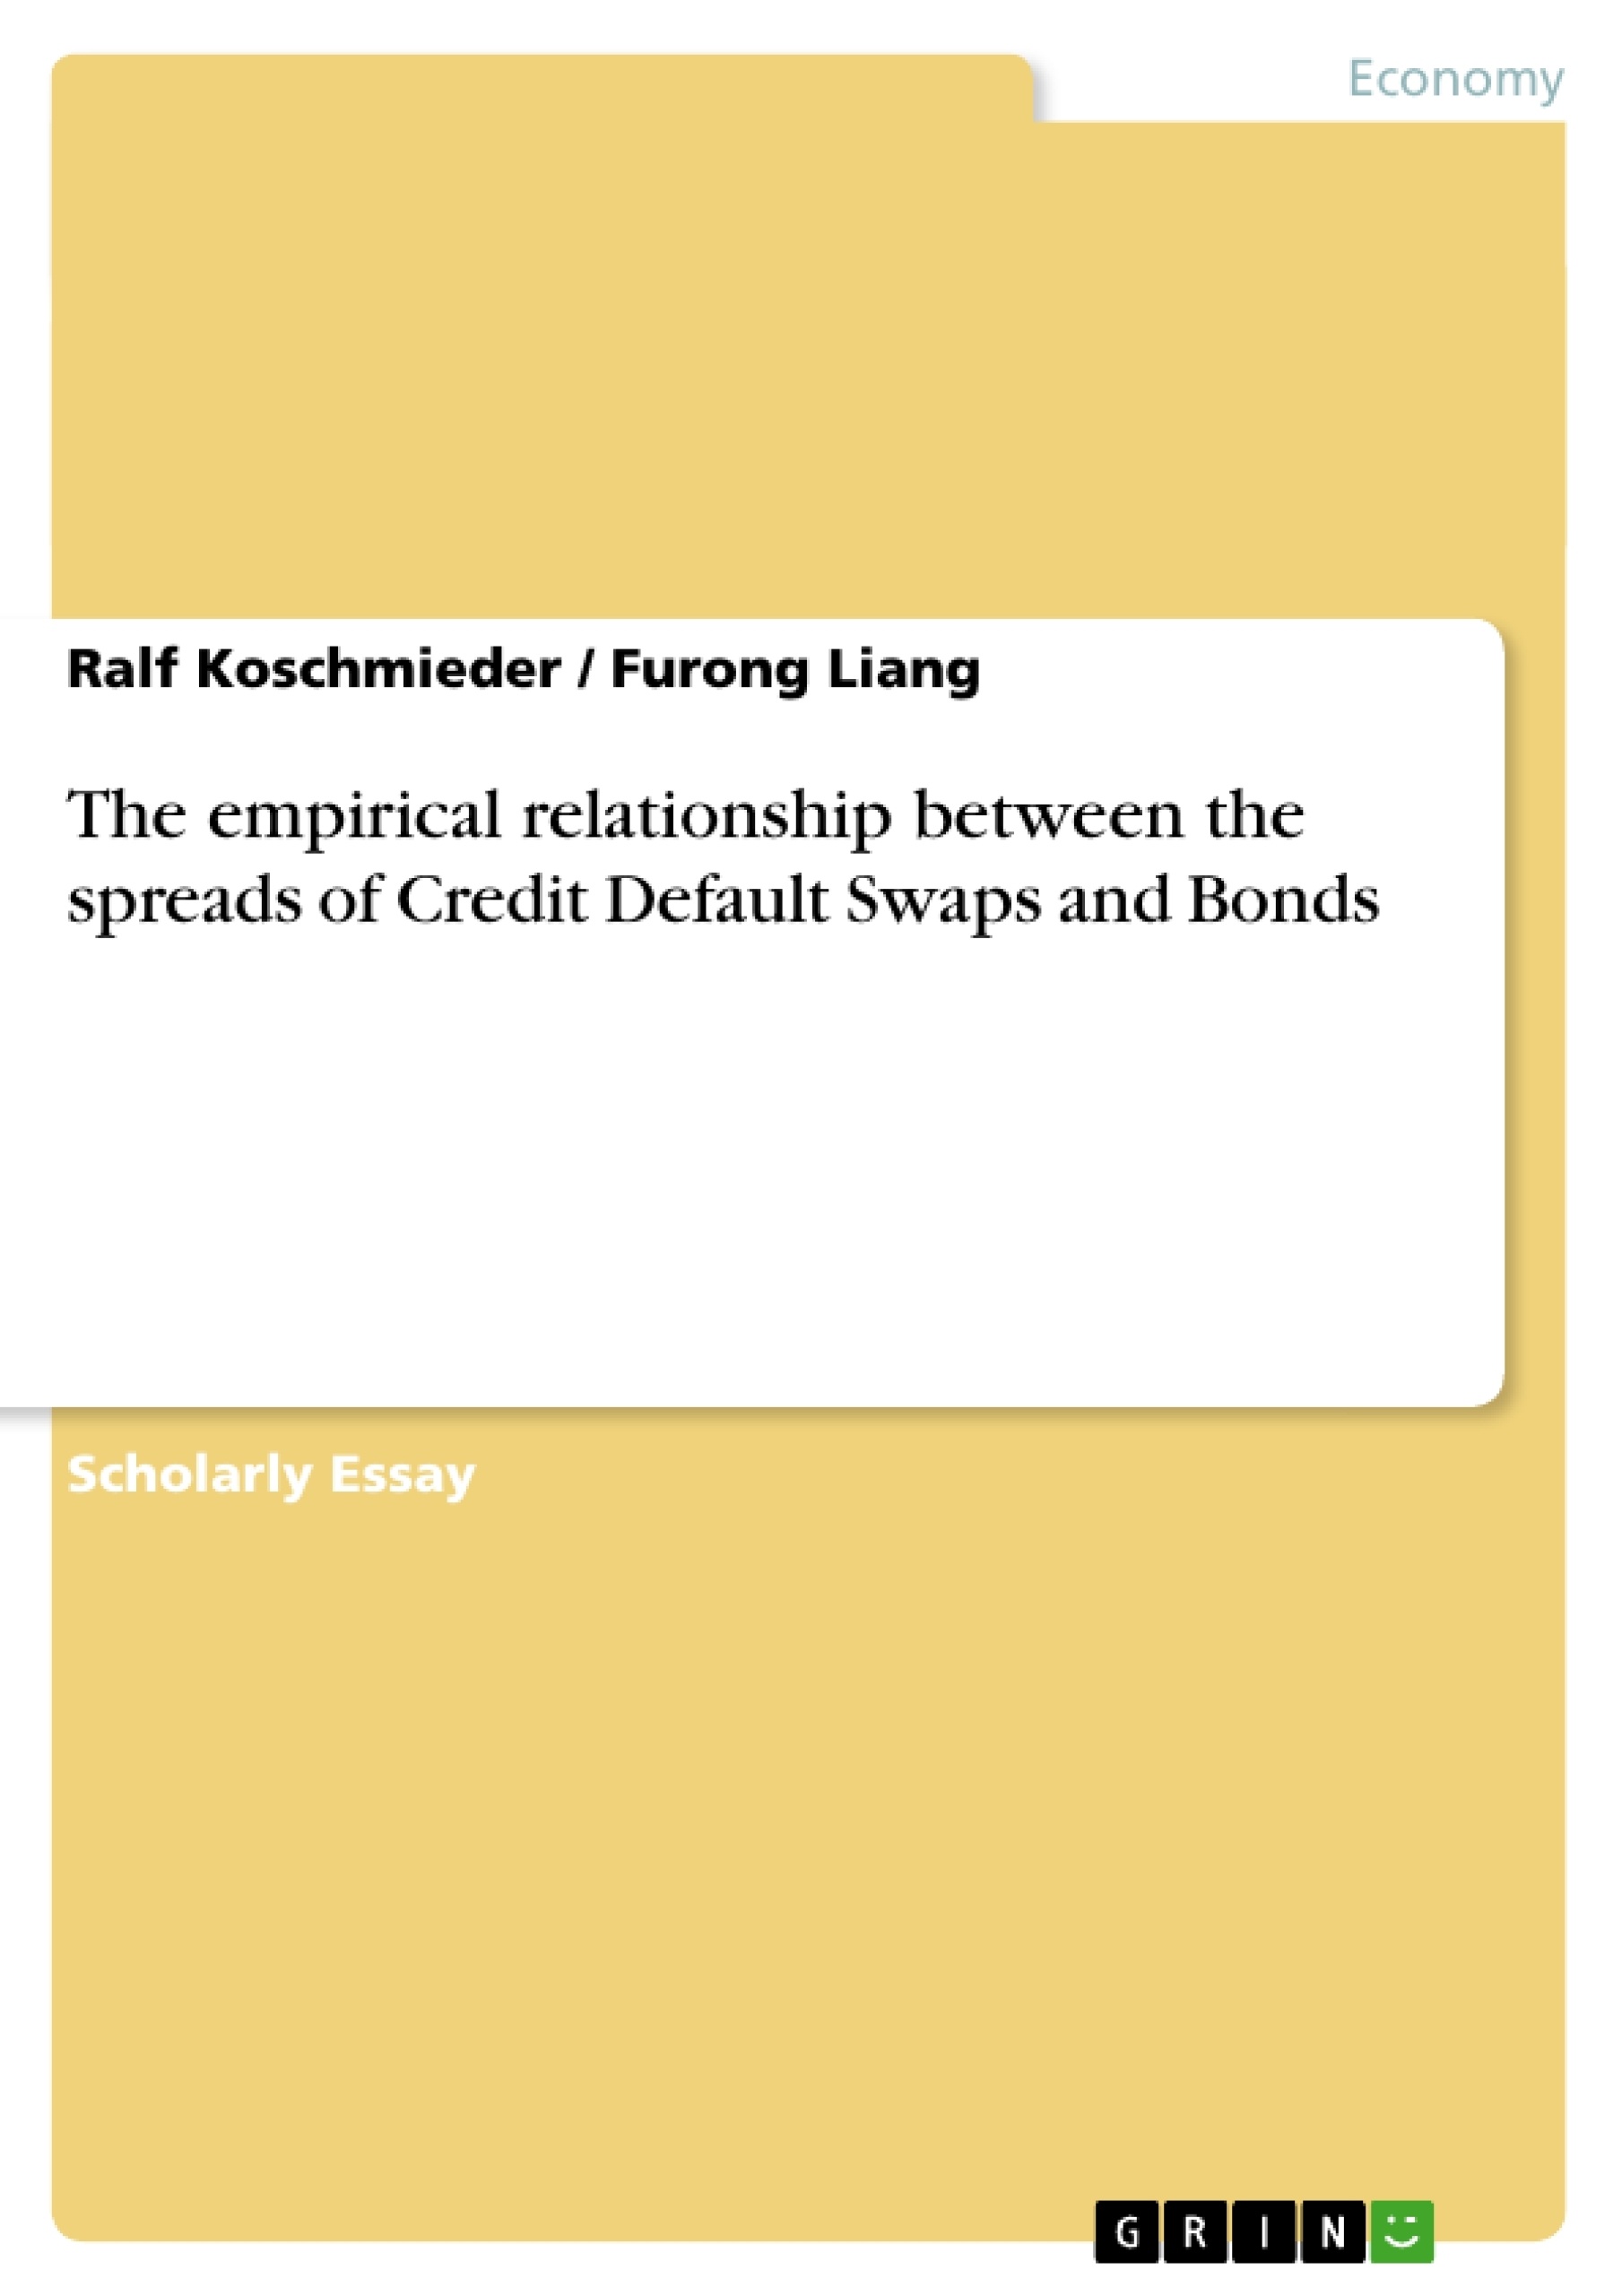 Title: The empirical relationship between the spreads of Credit Default Swaps and Bonds